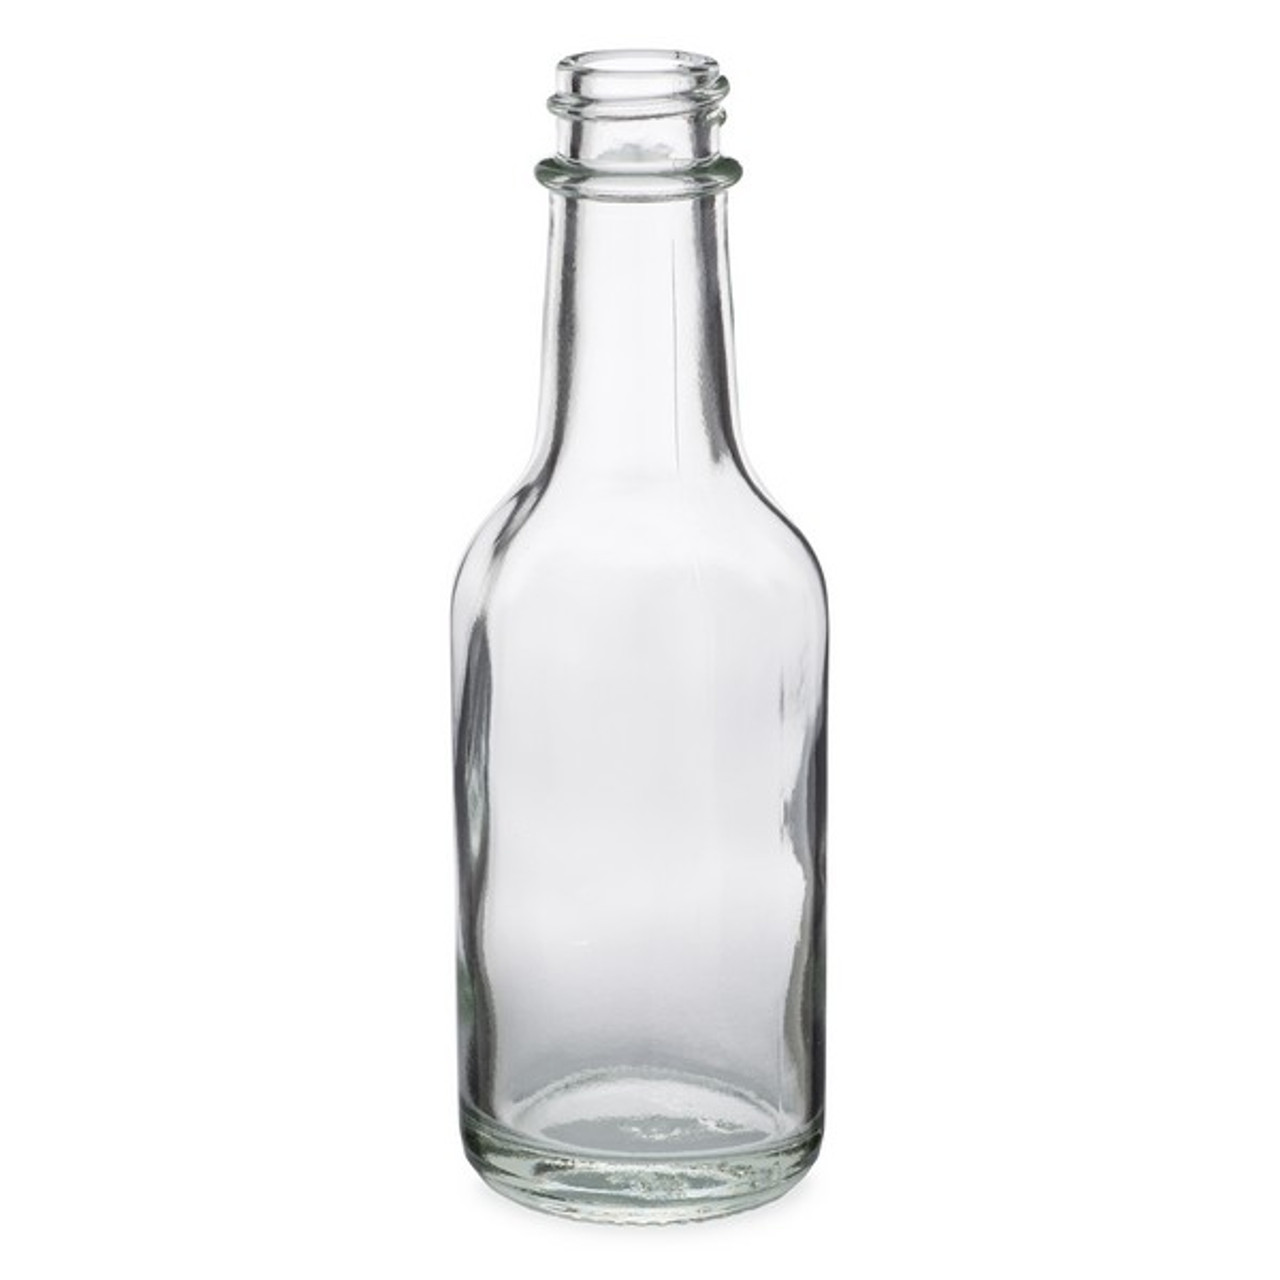 Download 1 6 Oz Clear Glass Mini Bottles Cap Not Included Berlin